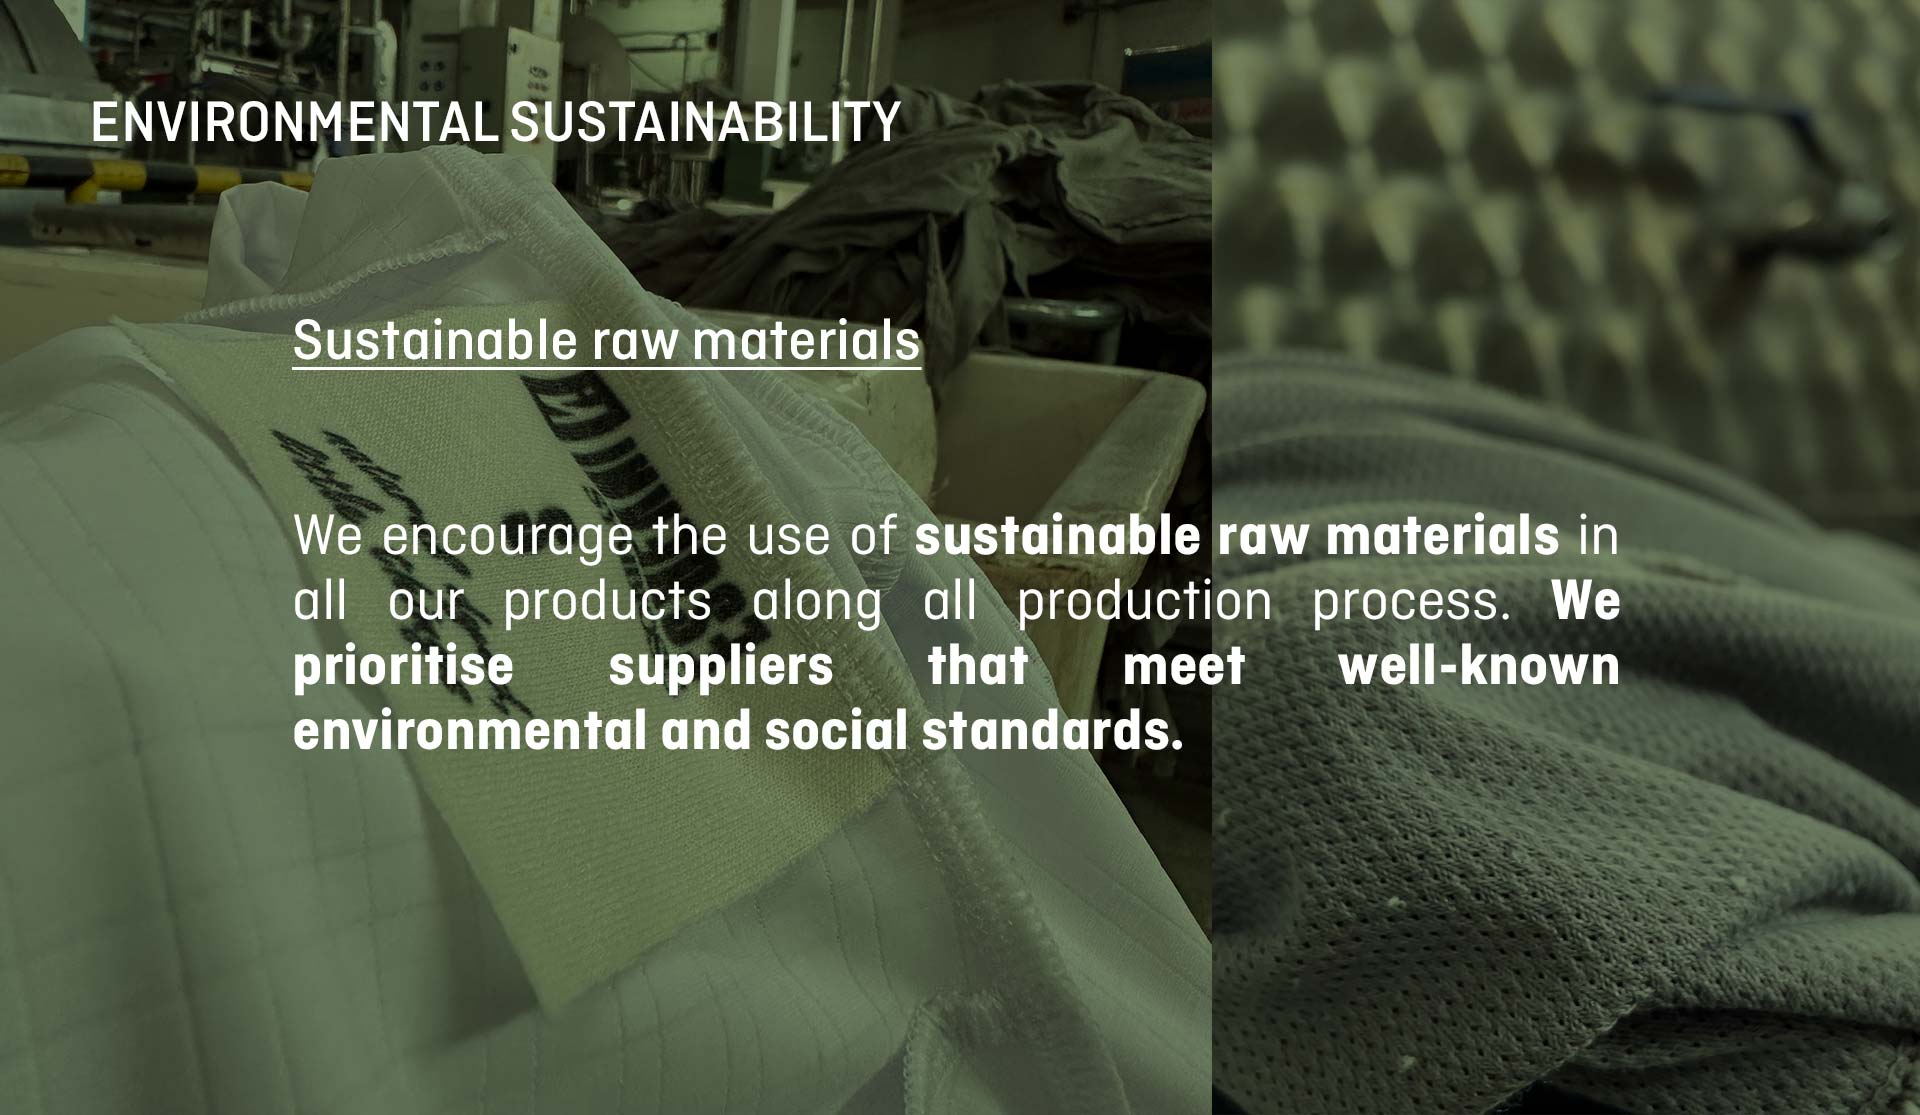 We encourage the use of sustainable raw materials in all our products along all production process. 